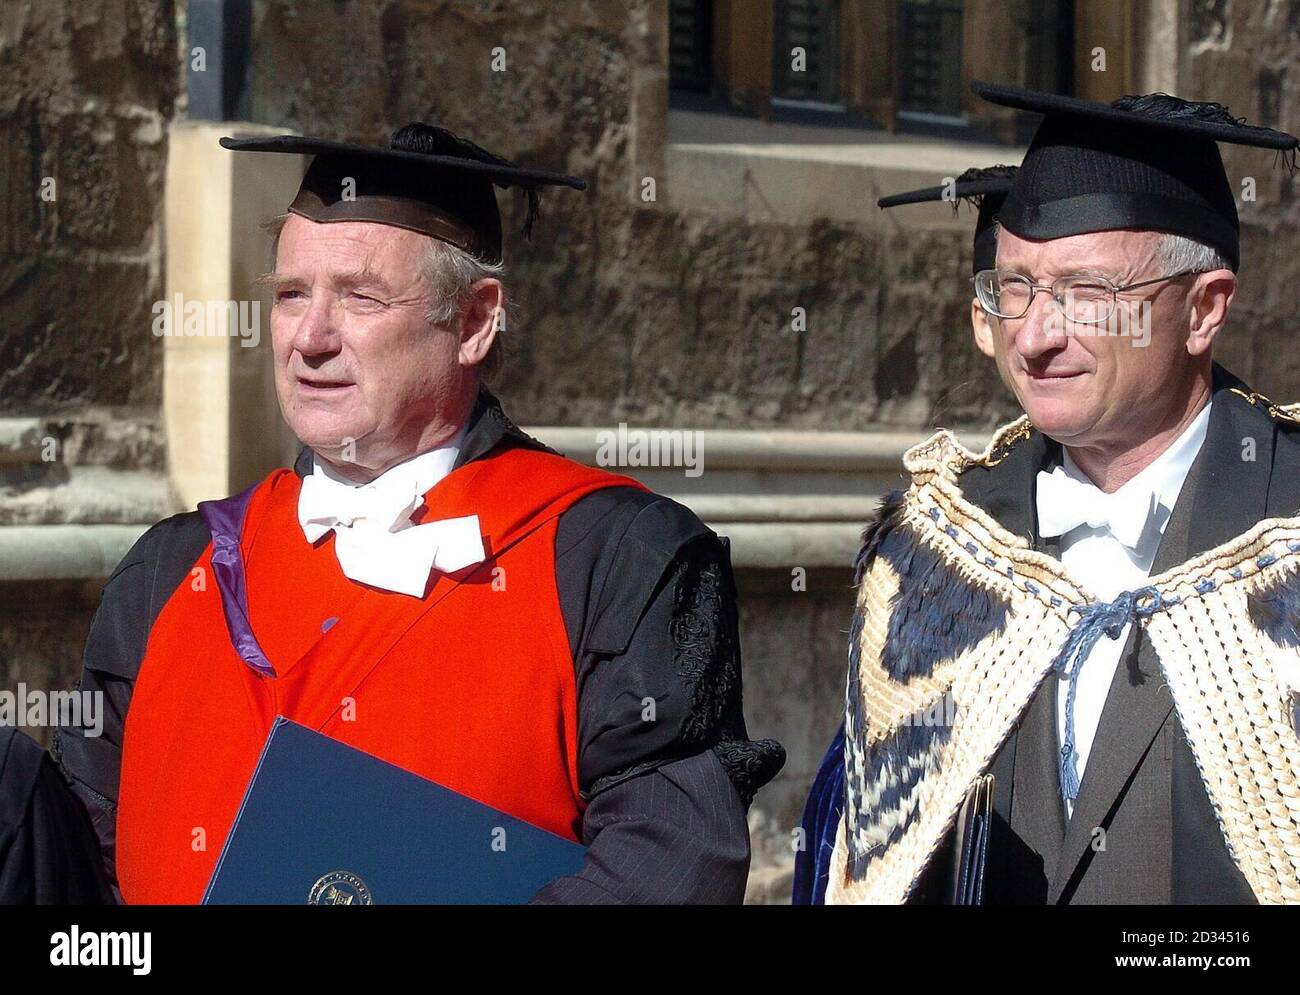 The new Vice-Chancellor of Oxford University Dr John Hood (right) and the outgoing Vice-Chancellor Sir Colin Lucas lead the procession from Old Clarendon Building to the University Church of St Mary the Virgin for the admission ceremony in front of the varsity's 'parliament of dons'. A former adviser to the New Zealand cricket squad, Dr Hood is the 270th individual and the first outside candidate to hold the post an and the 270th. Stock Photo